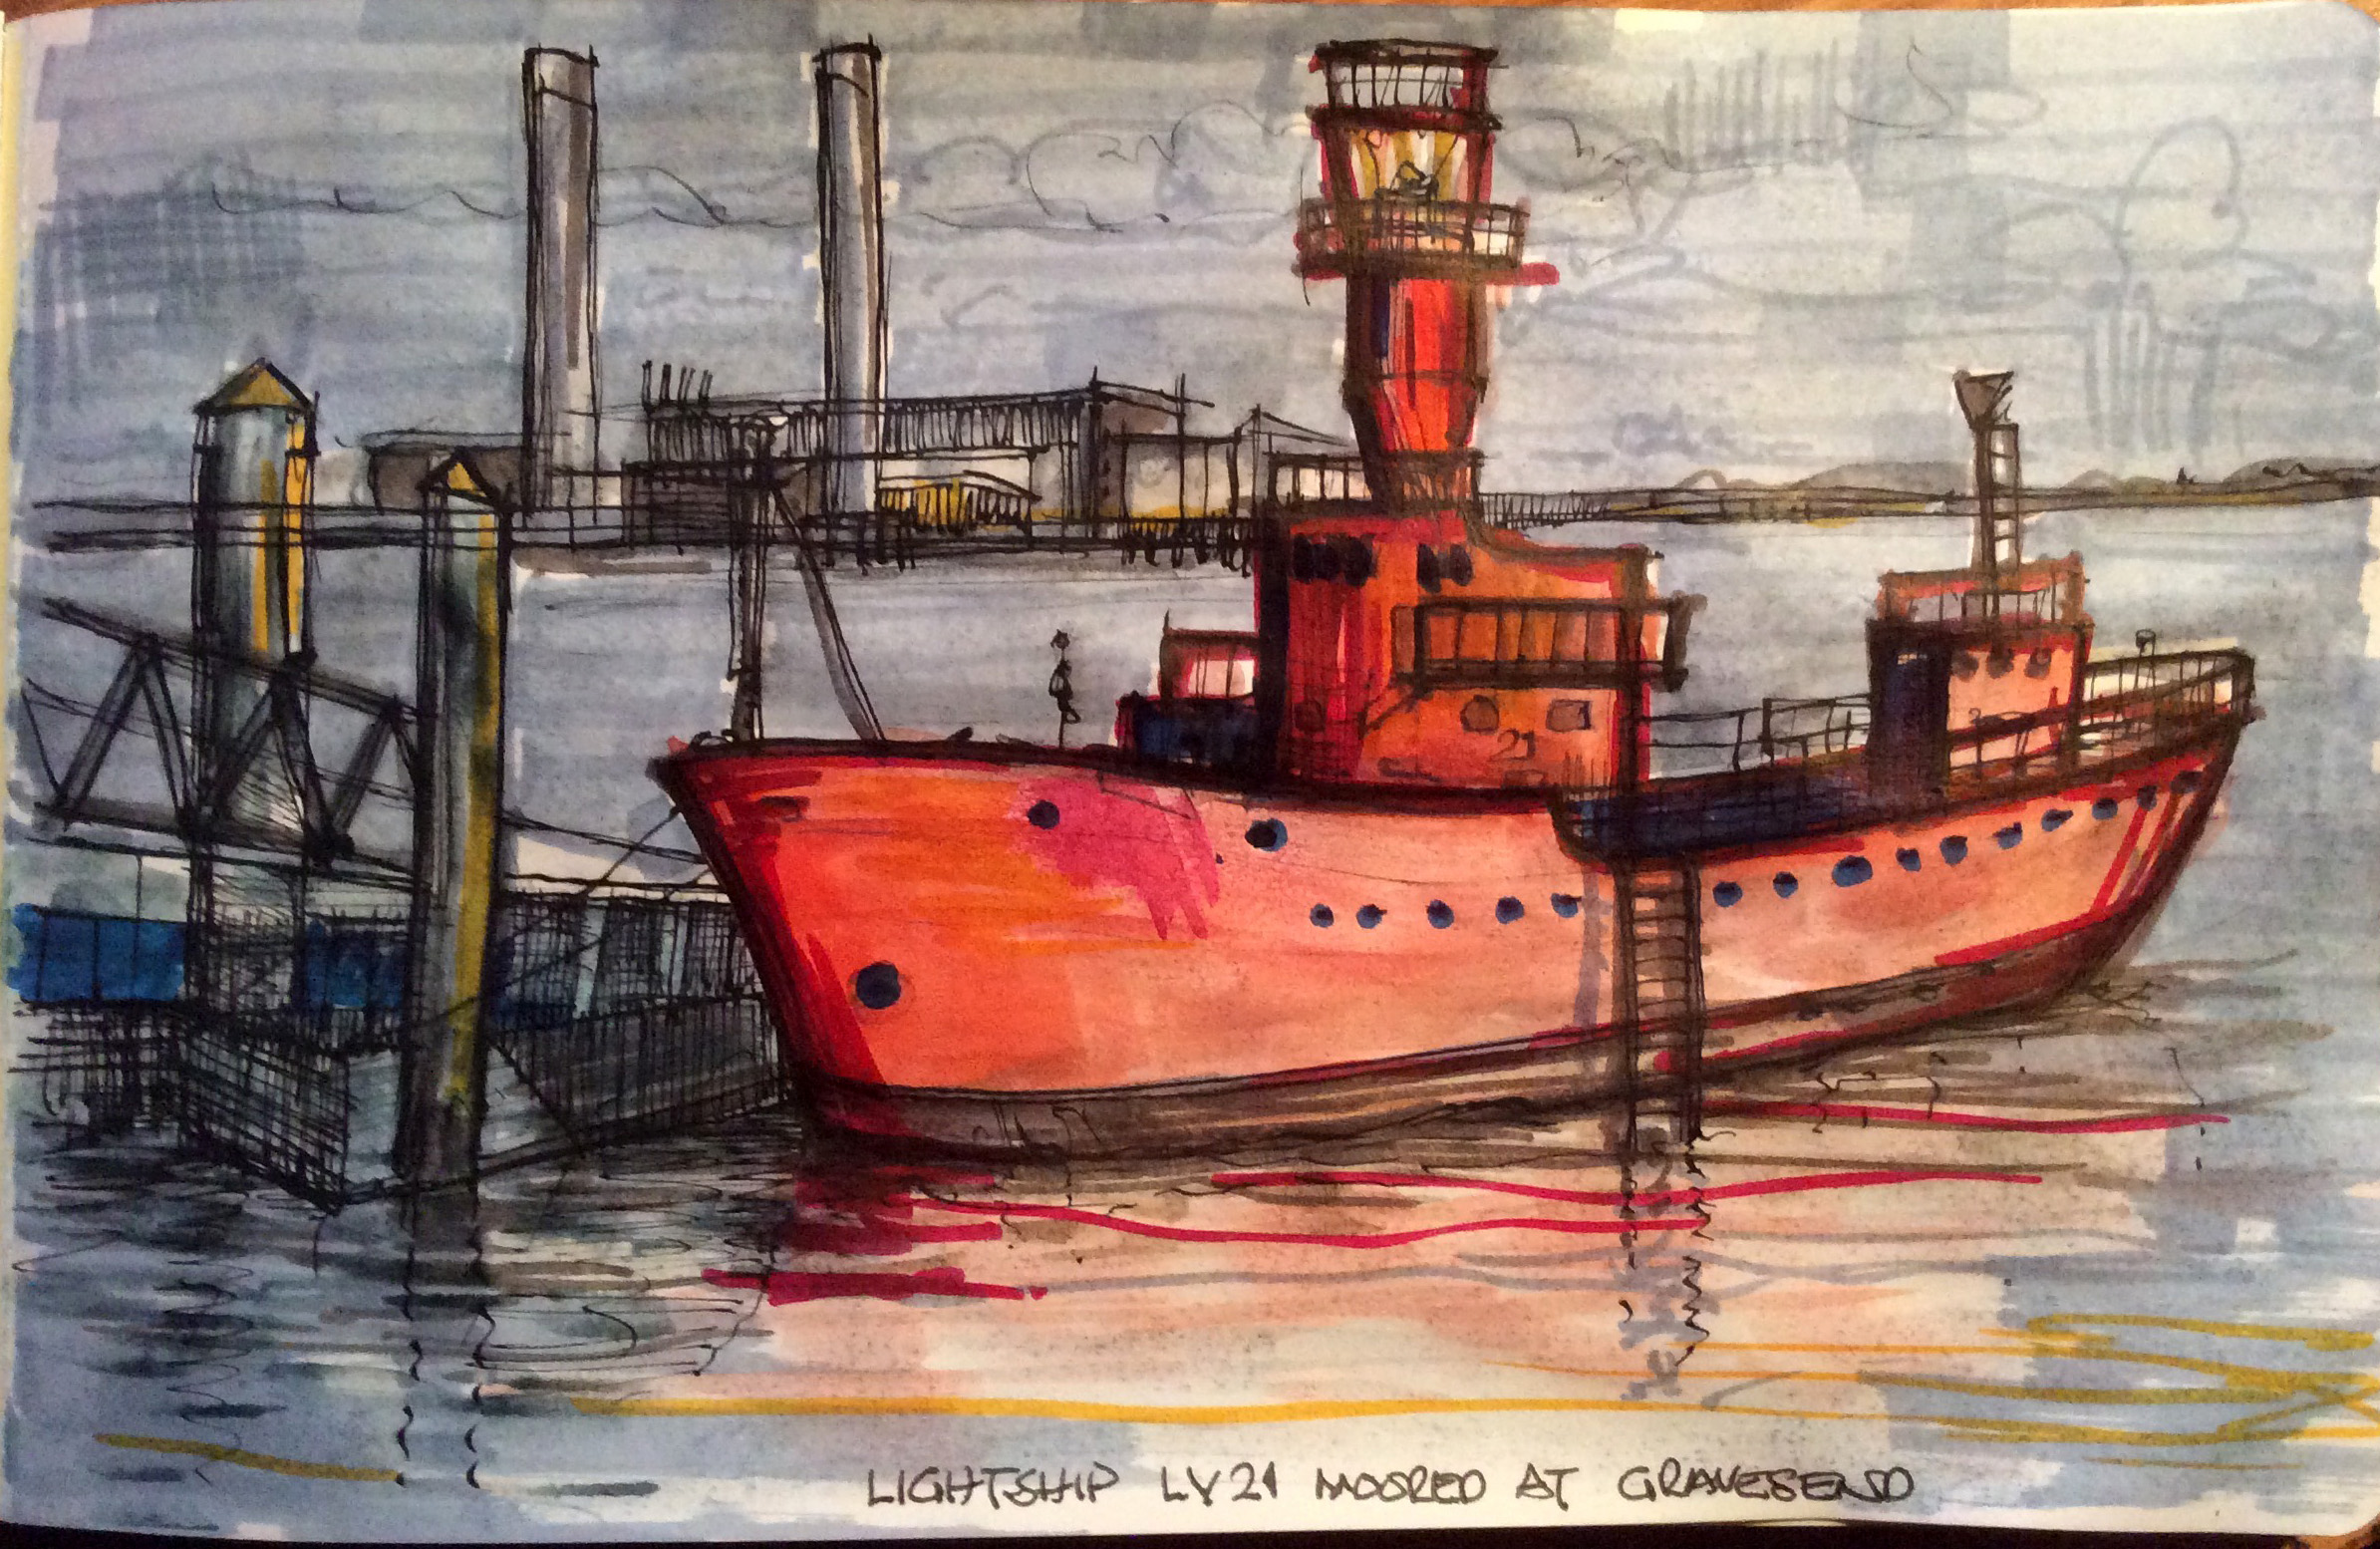 The Lightship LV21 moored at Gravesend